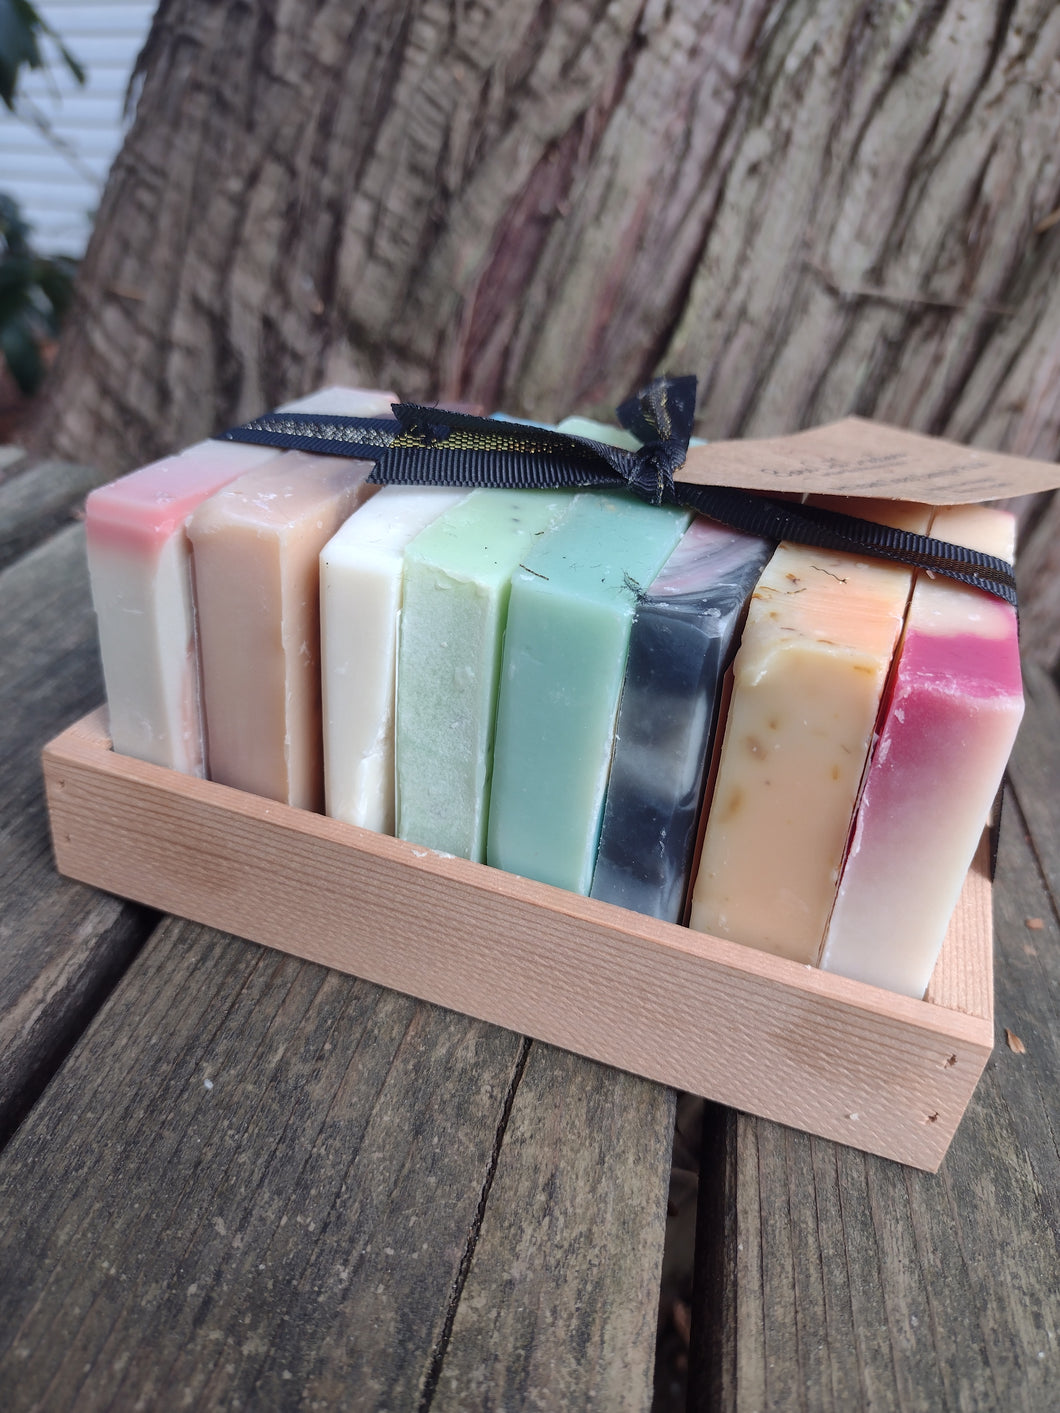 Artisan Soap Sample Crate - Limited Edition